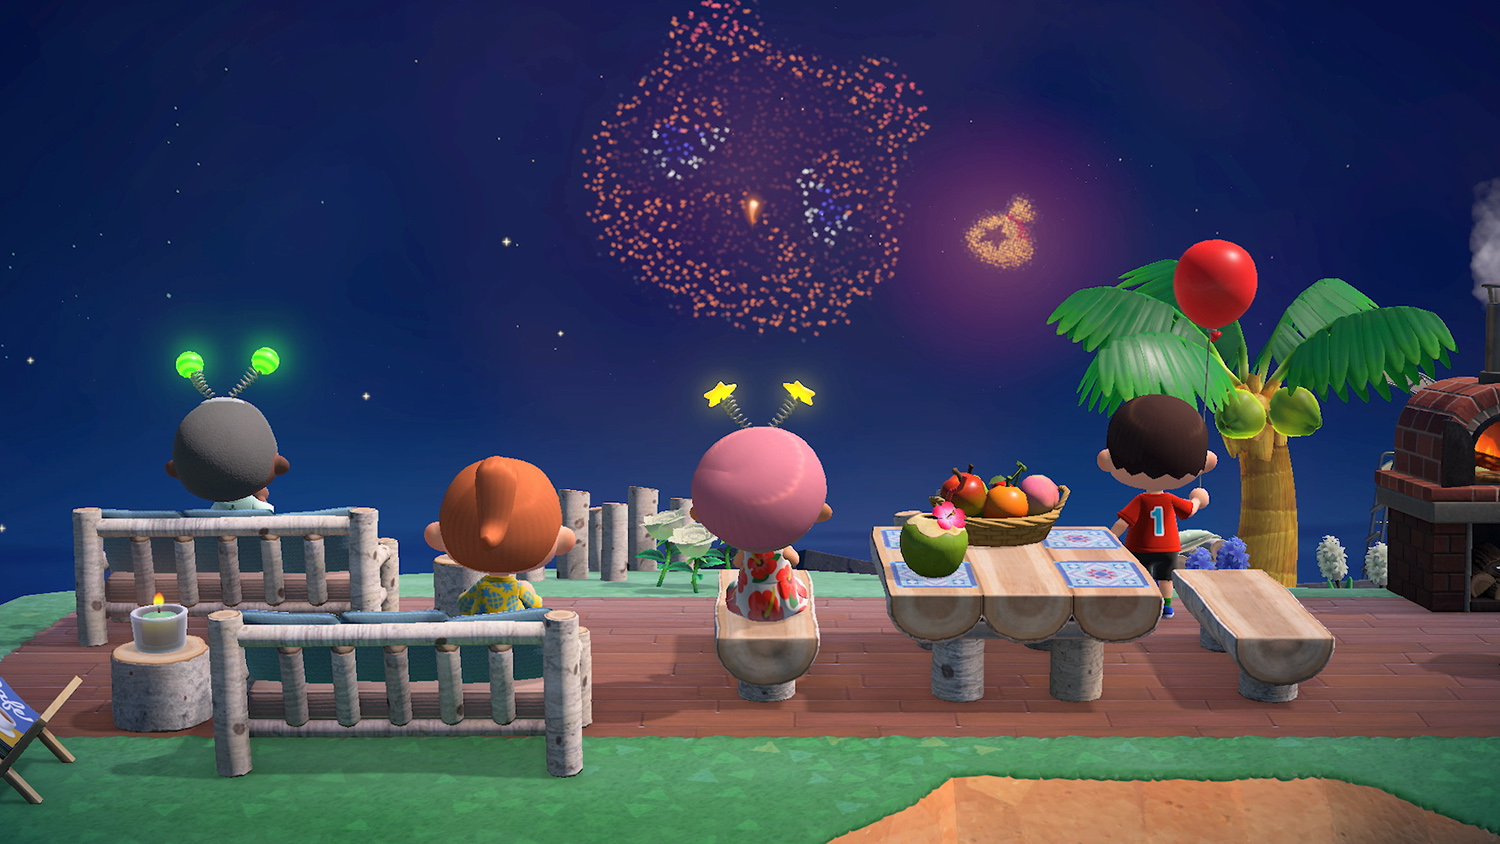 Animal Crossing: New Horizons players watch fireworks in the summer 2020 update